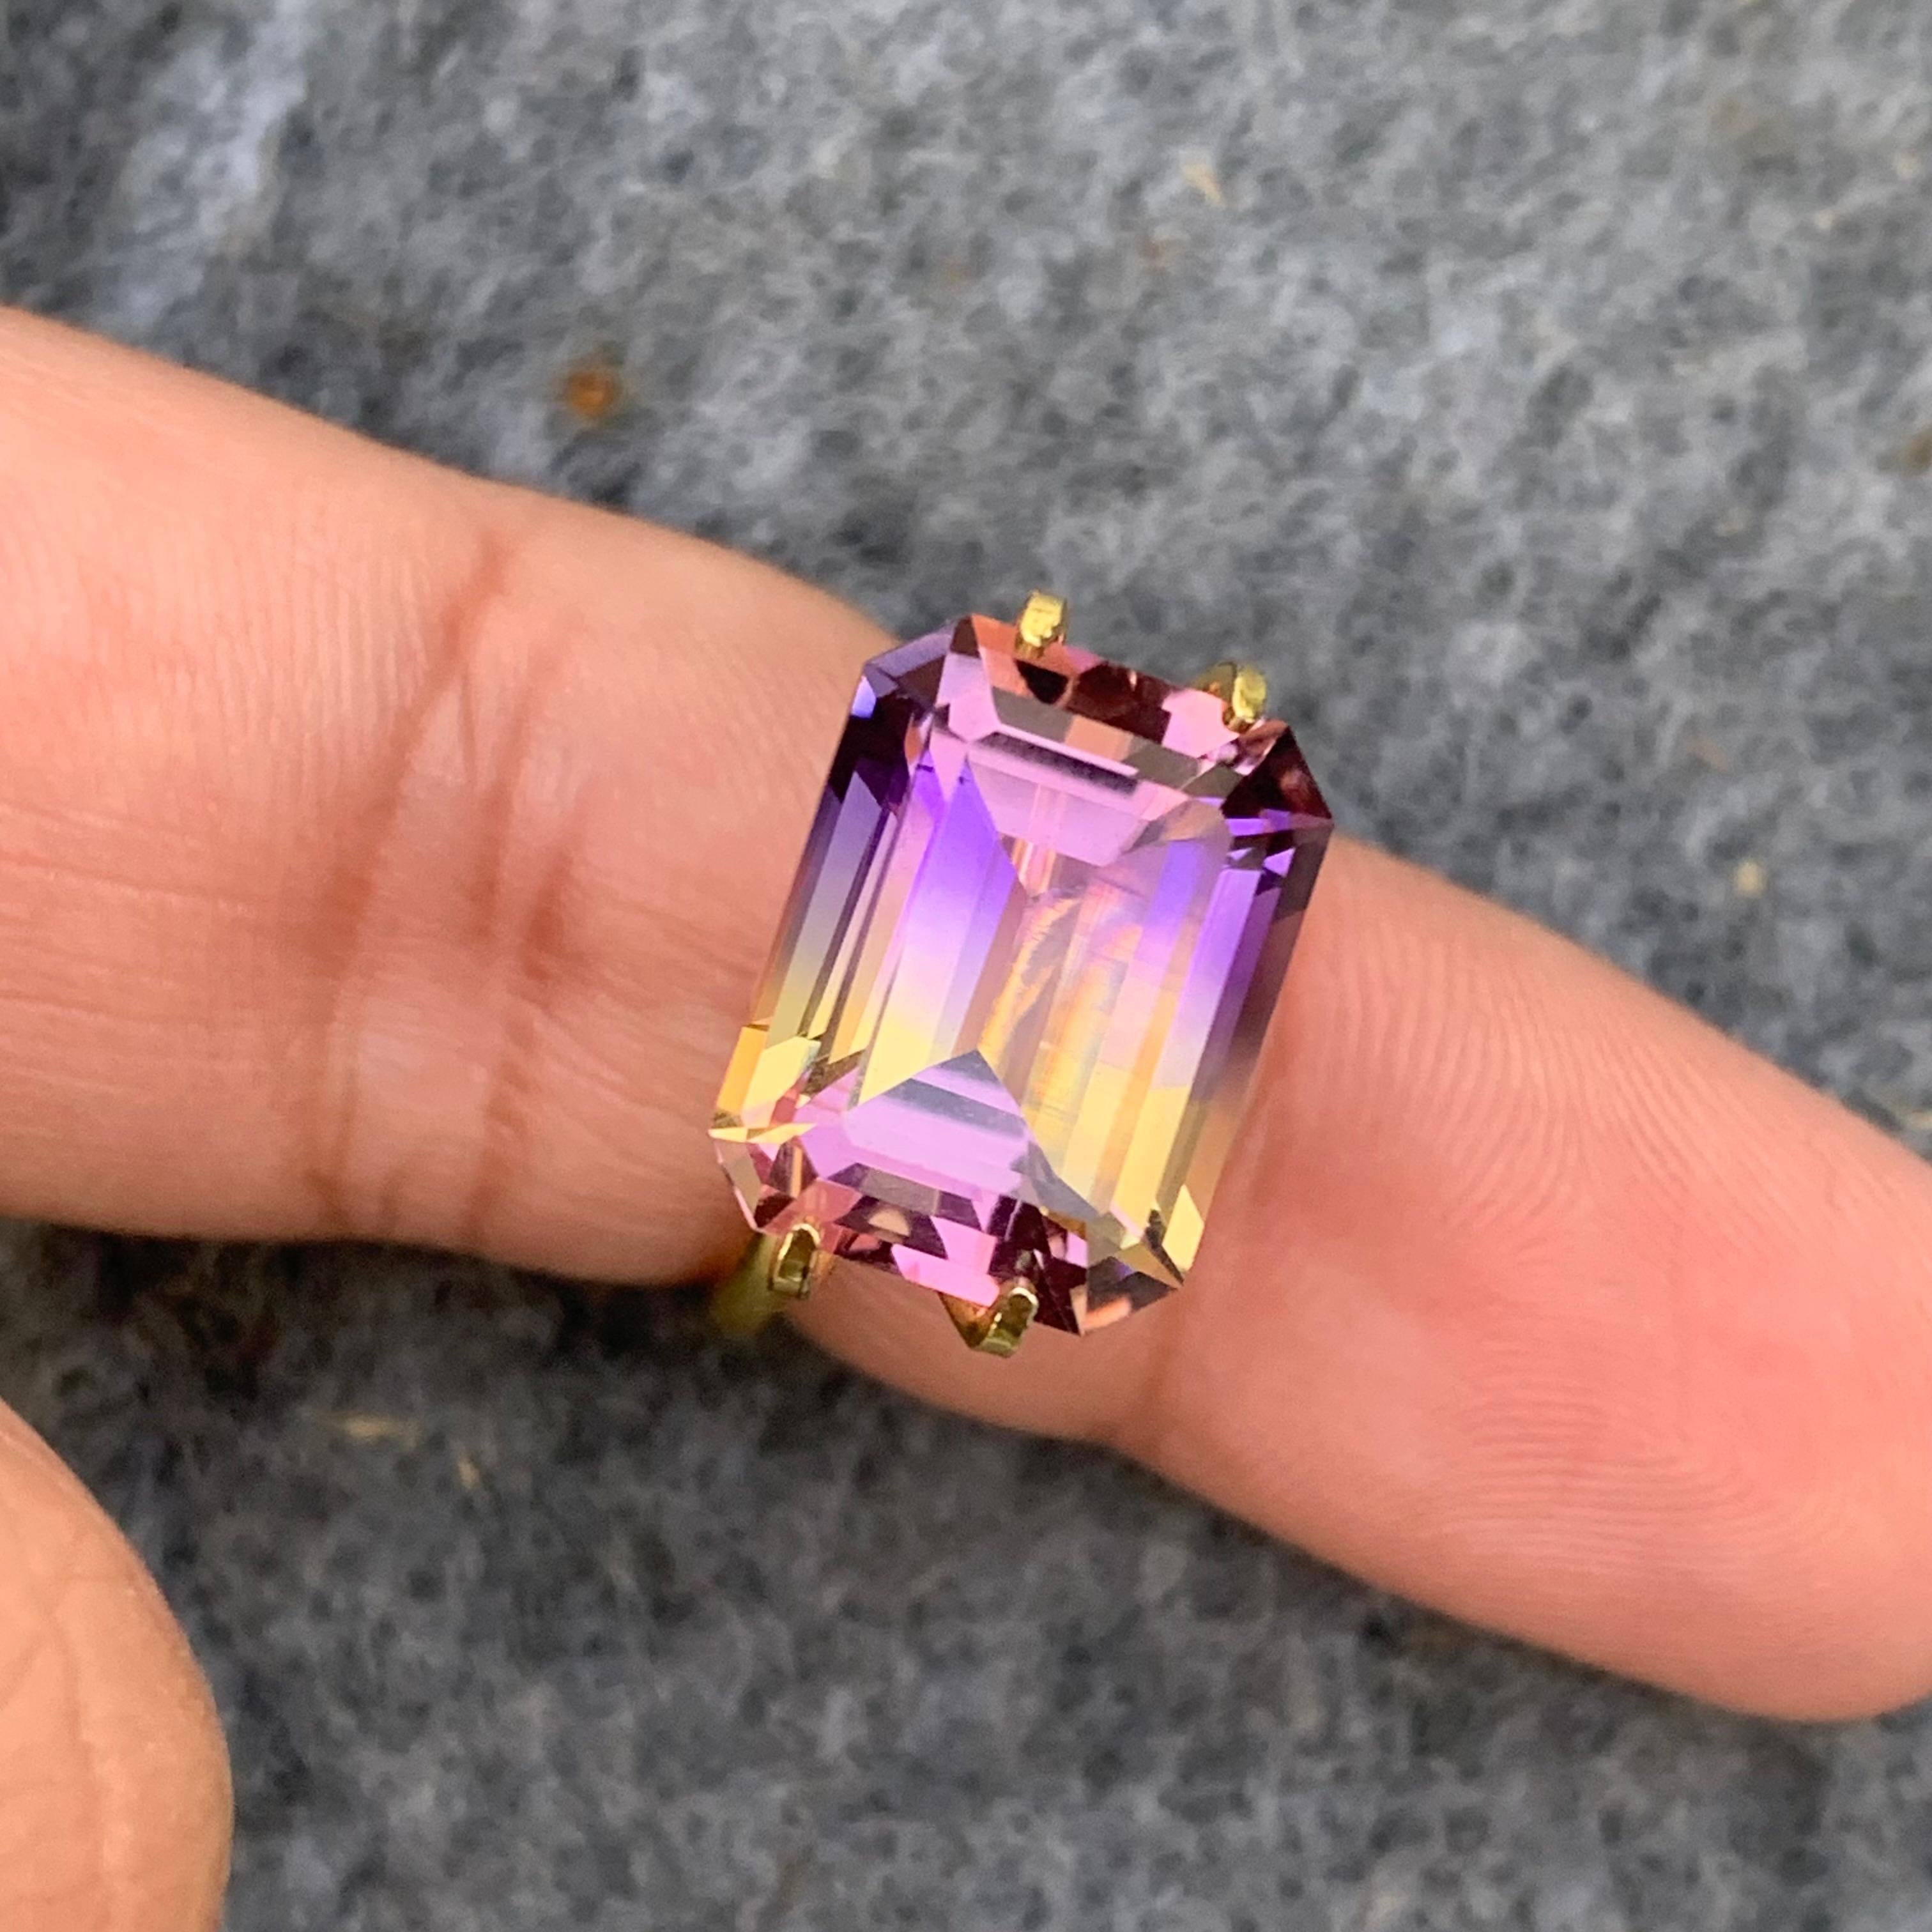 Faceted Ametrine 
Weight: 7.70 Carats
Dimension: 13.8x10.6x7.7 Mm
Origin: Bolivia 
Color: Purple & Yellow
Clarity: Loupe Clean
Certificate: On Demand
For those born in the month of February, you've been graced with amethyst as your birthstone.